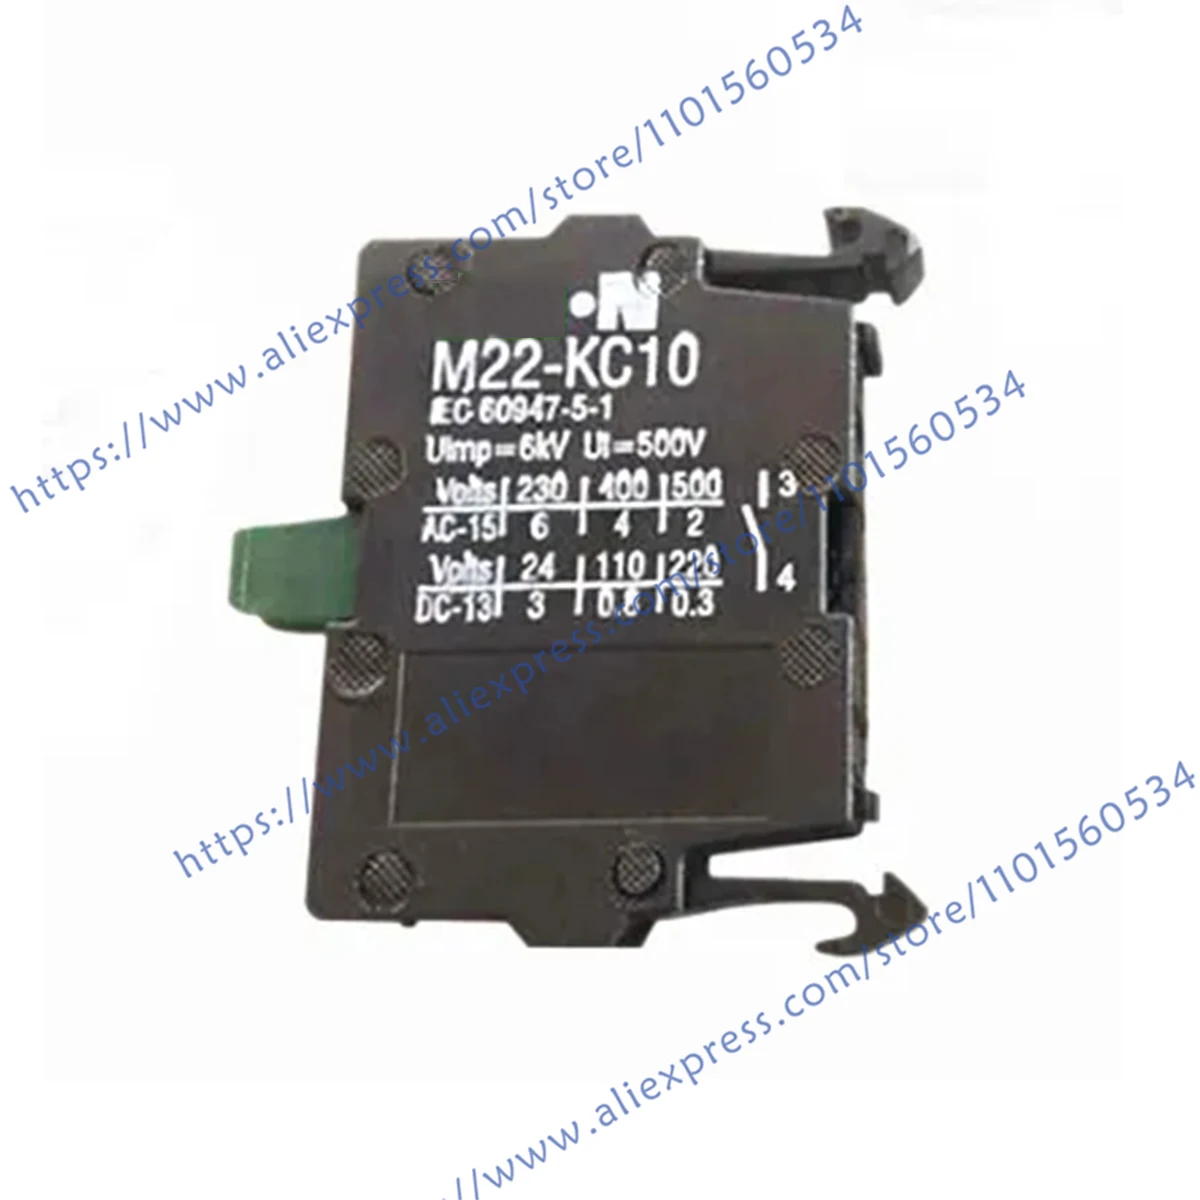 

New And Original Connector M22-kc01 Spot Photo, 1-Year Warranty